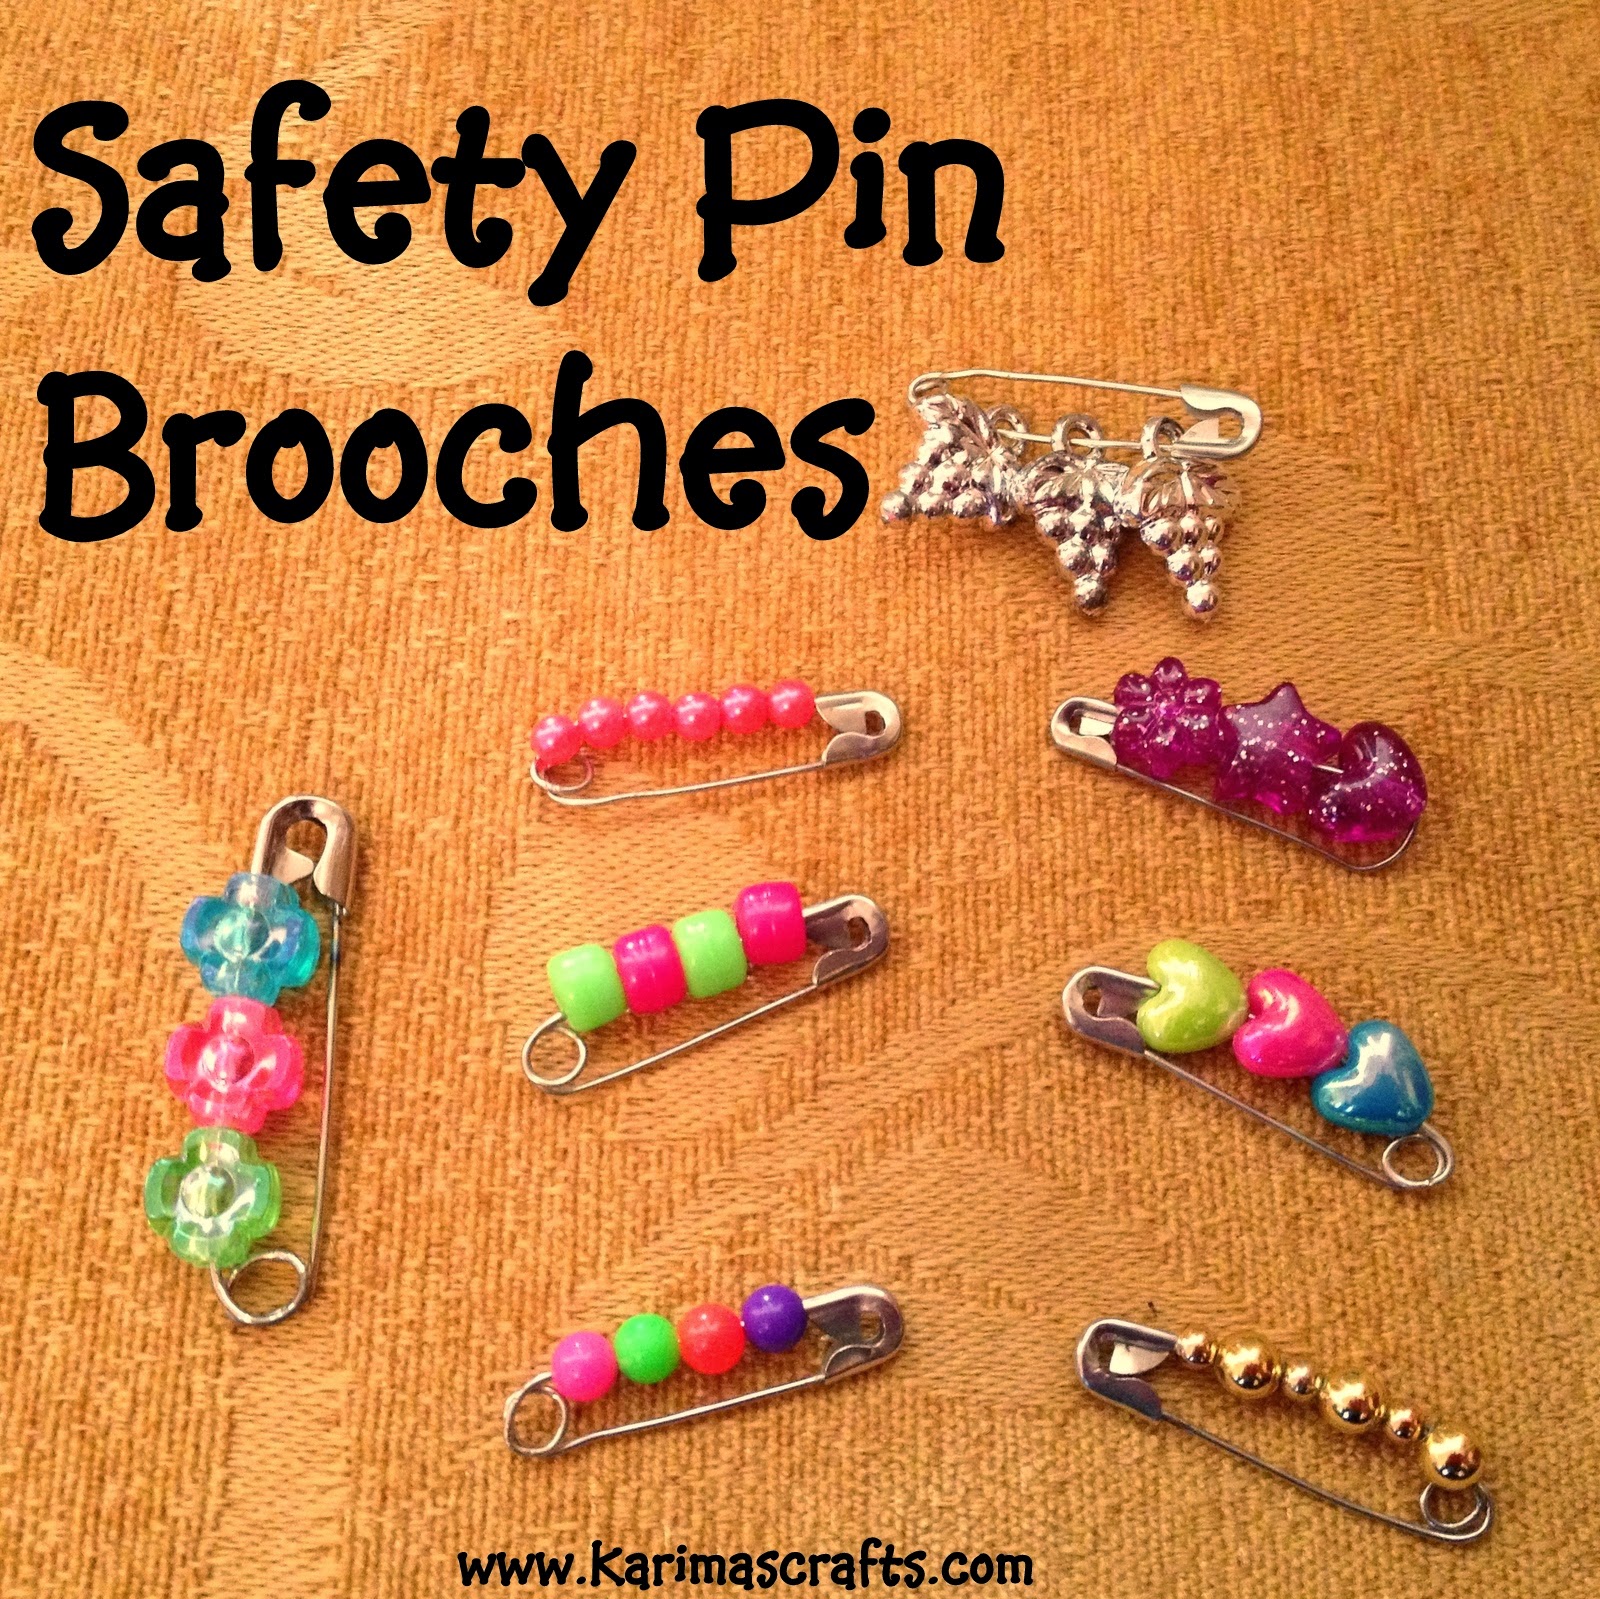 karima-s-crafts-safety-pin-brooches-tutorial